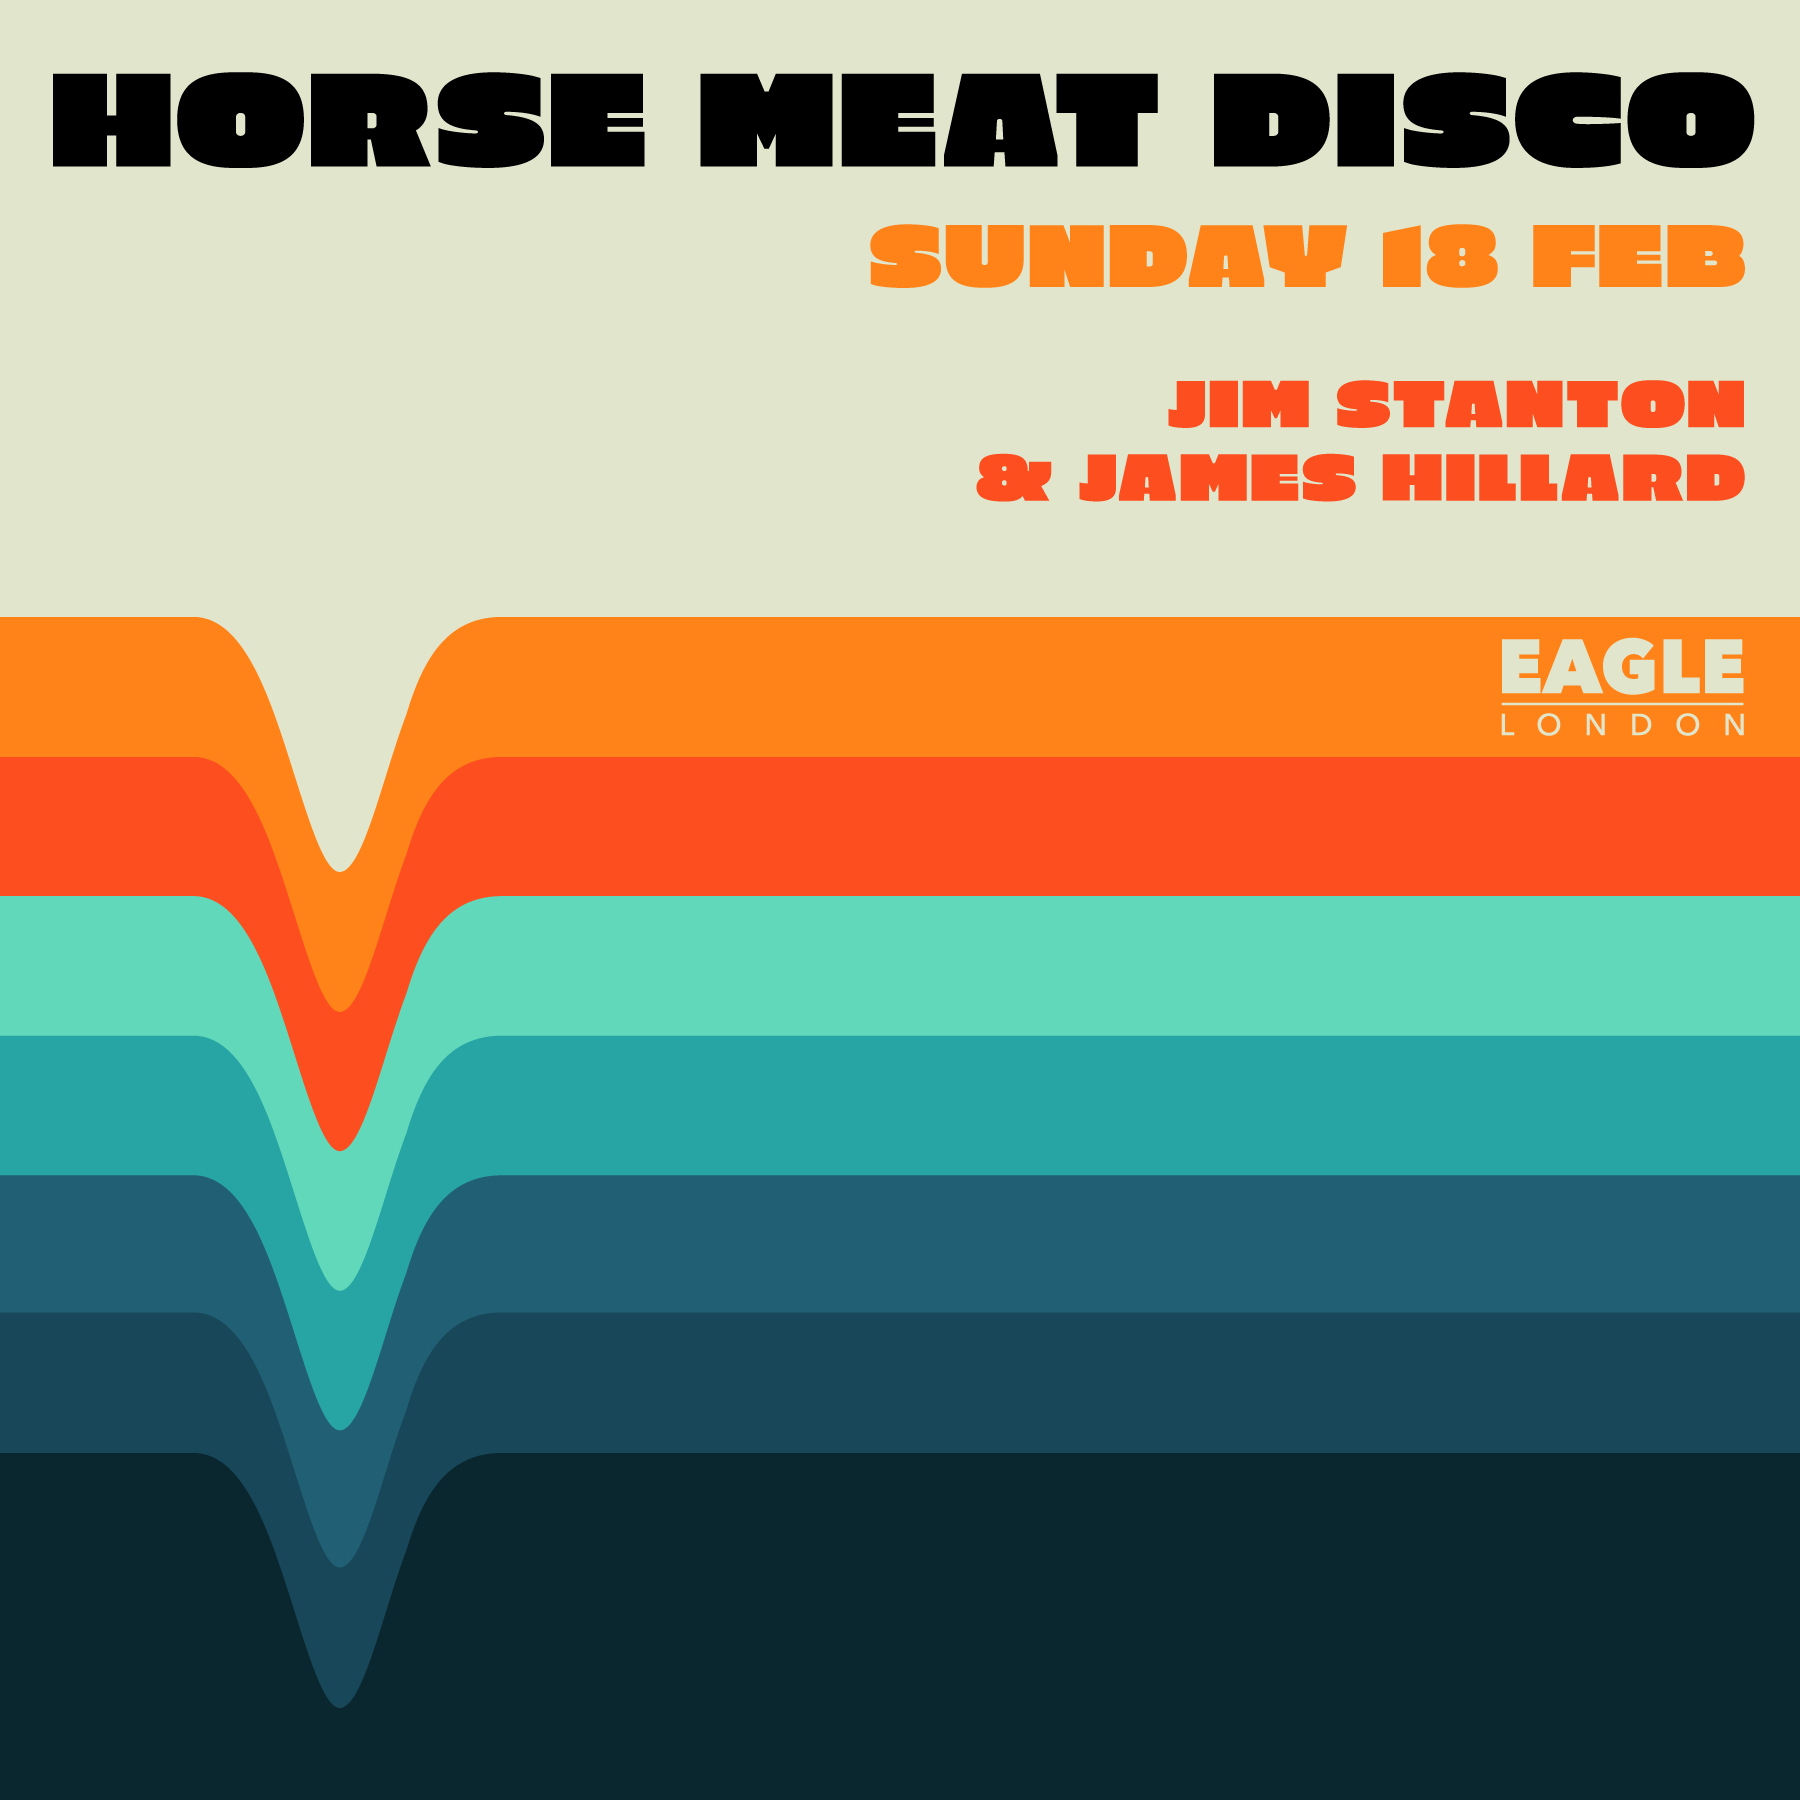 Horse Meat Disco - The Legendary Sunday Night Discotheque - フライヤー表